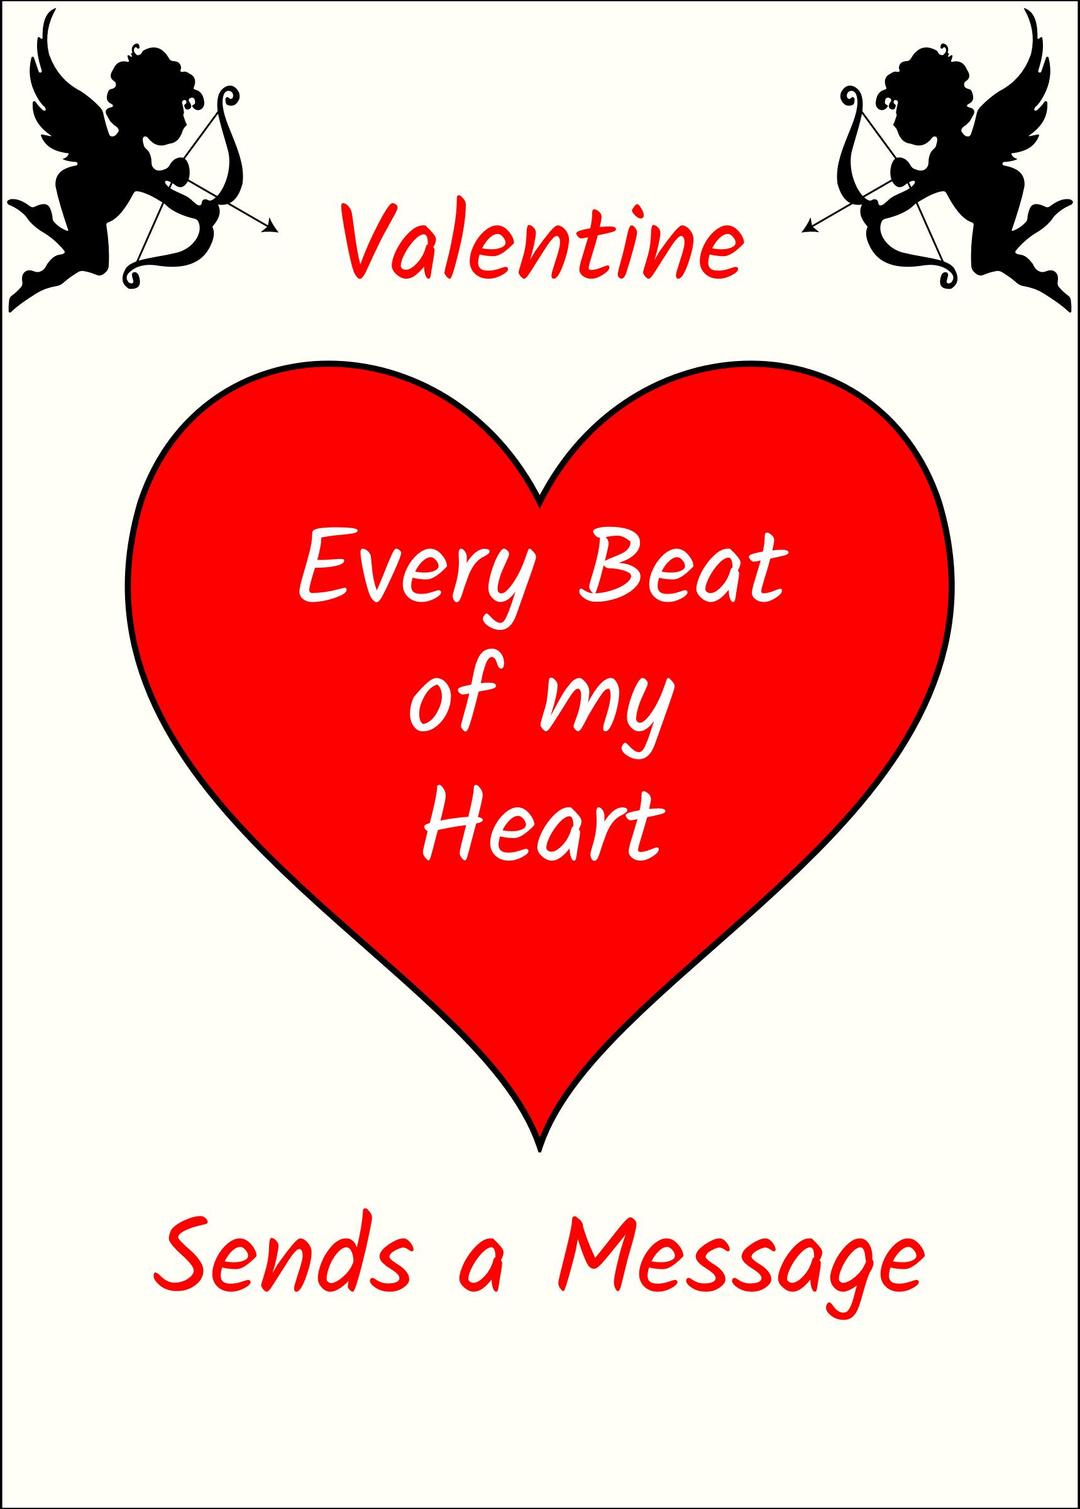 Valentines Day Card png transparent